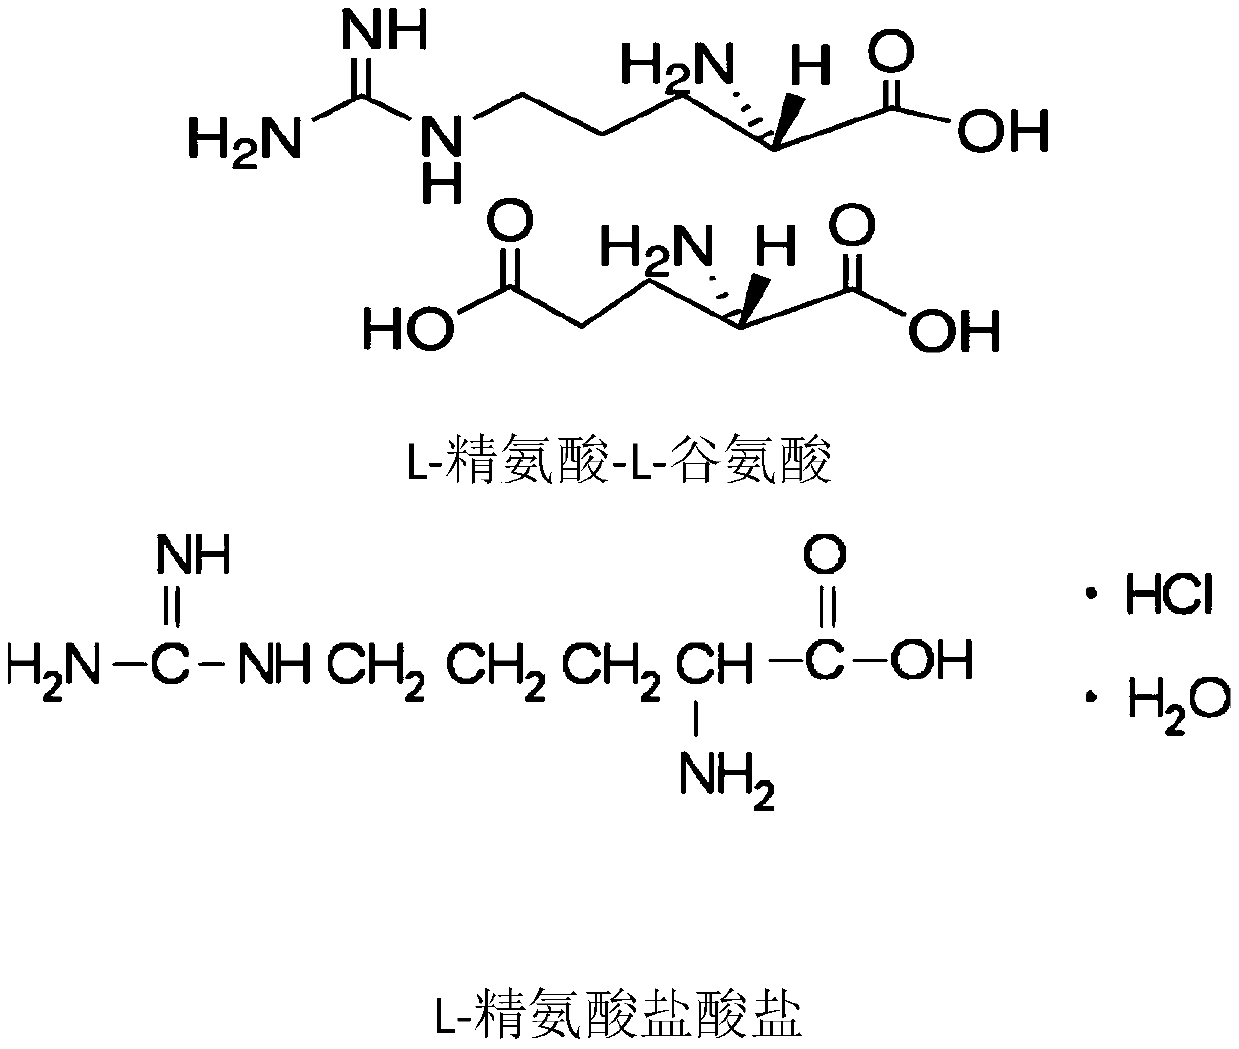 Applications of L-arginine and derivative of L-arginine in preparation of cyclododecanoneoxime, and method used for preparing cyclododecanoneoxime